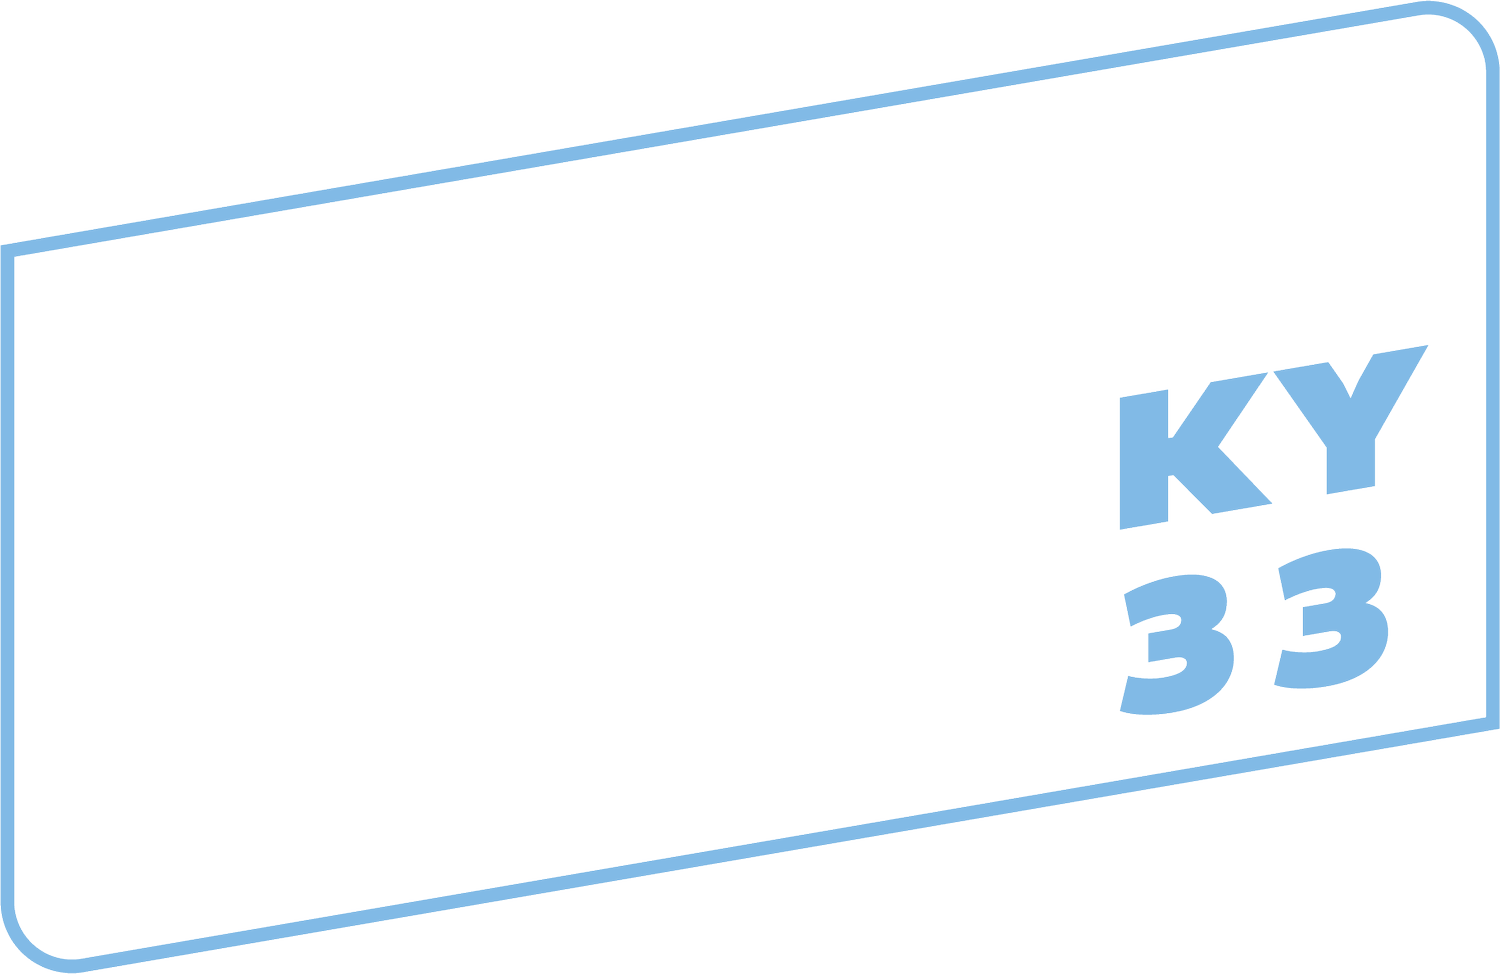 Taylor for Kentucky